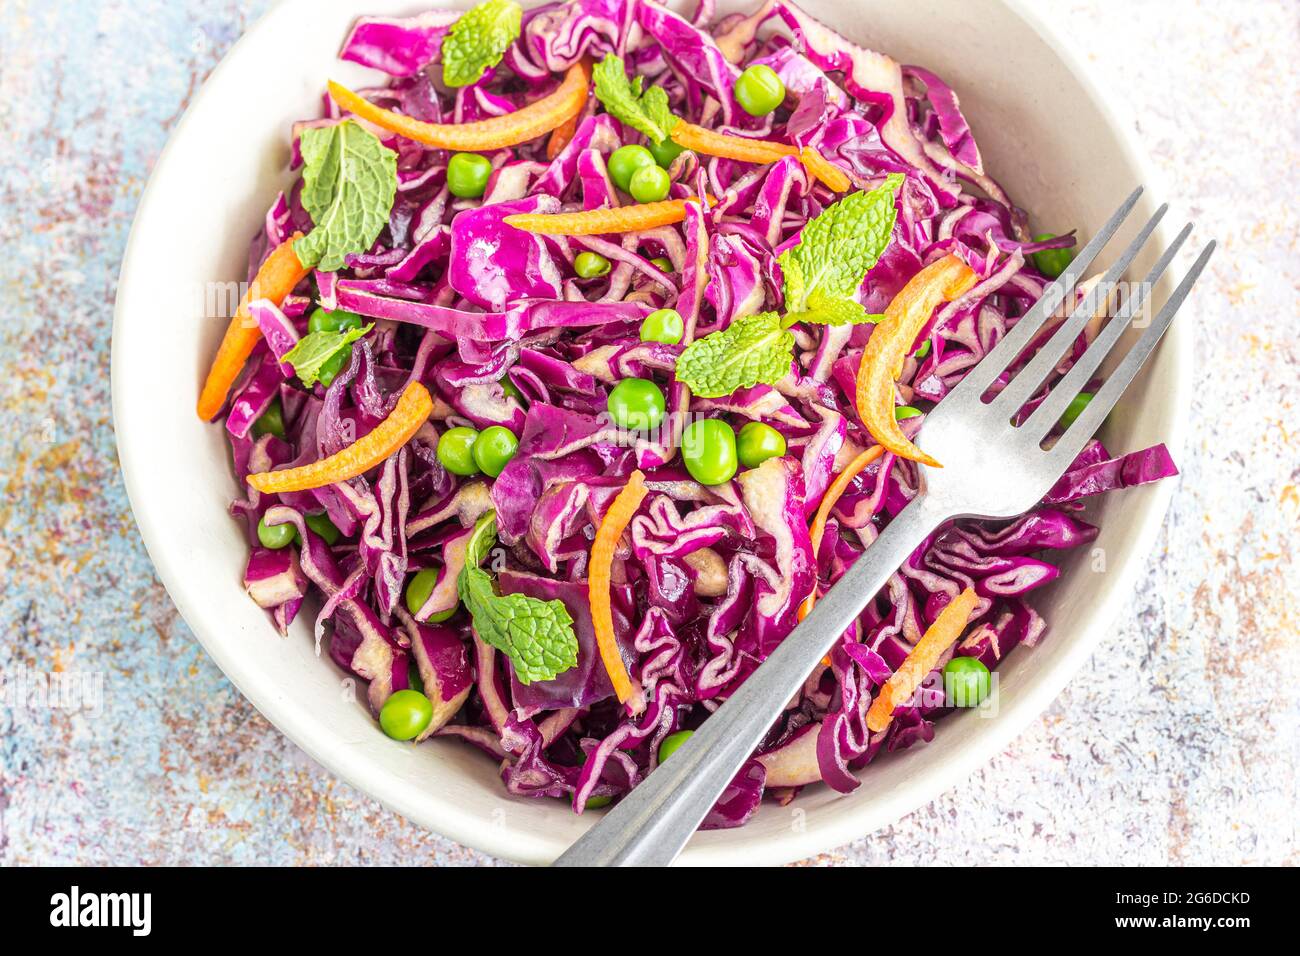 Healthy Purple Cabbage Salad  on a Wooden Base Top Down Close Up Photo Stock Photo